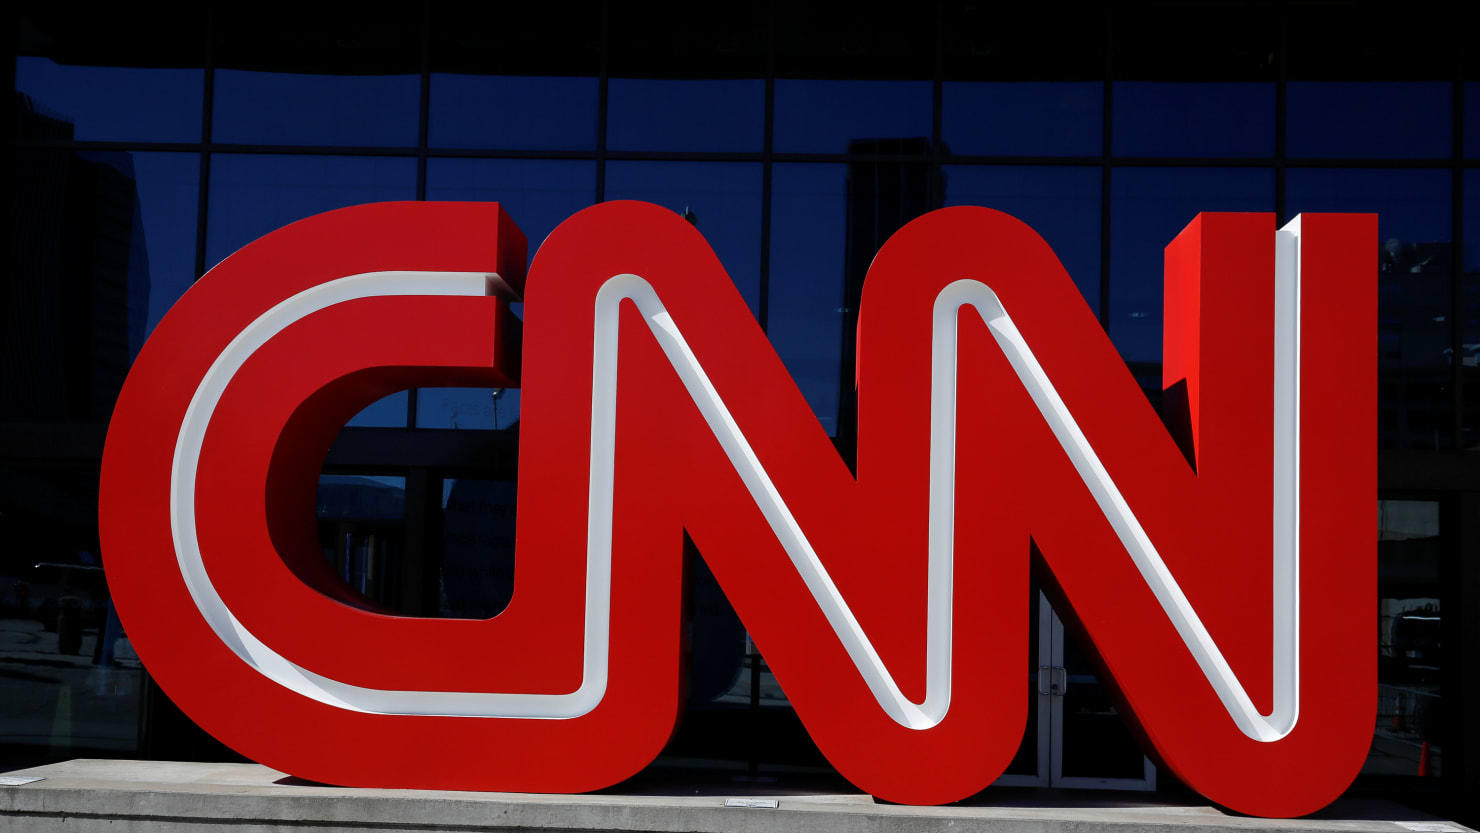 CNN CEO Chris Licht hands over business responsibilities, the report says